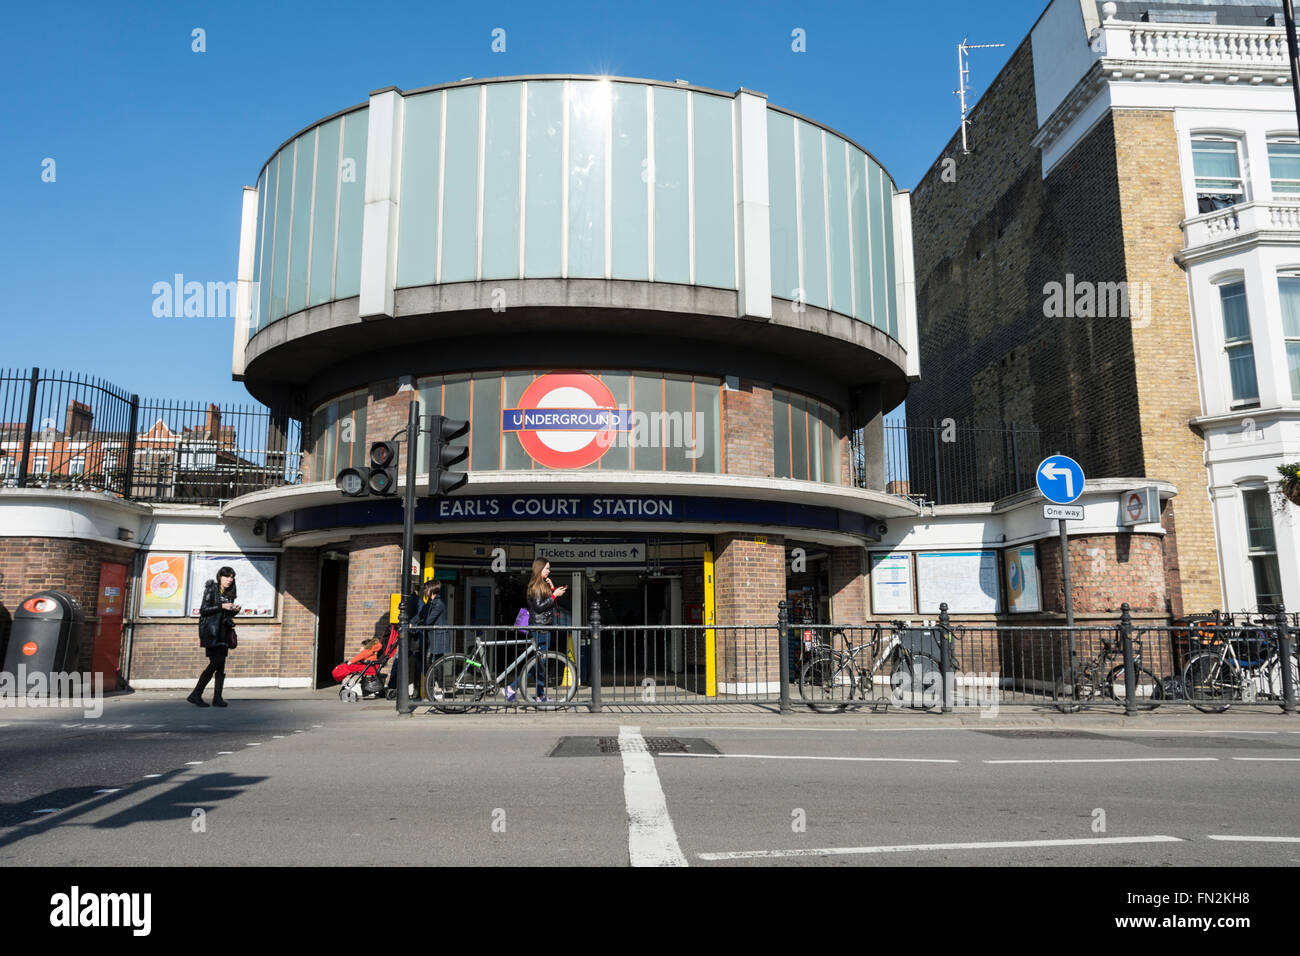 The rear entrance to Earl's Court London Underground station on Warwick Road, SW London, UK Stock Photo